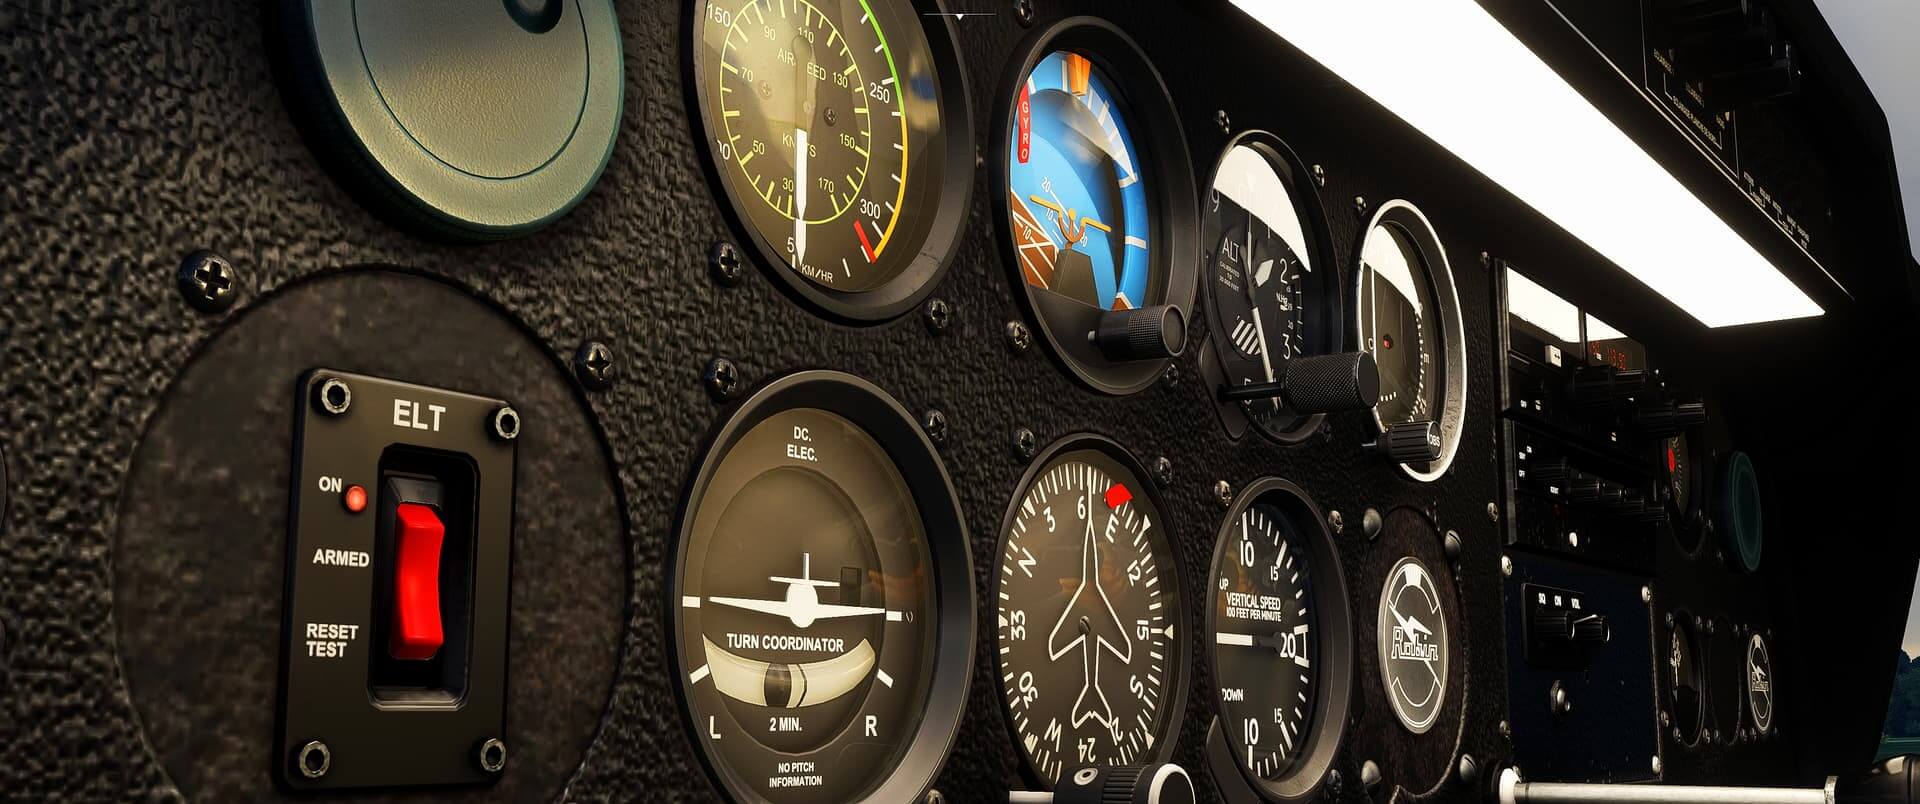 A close up of the dials and gauges from a general aviation aircraft